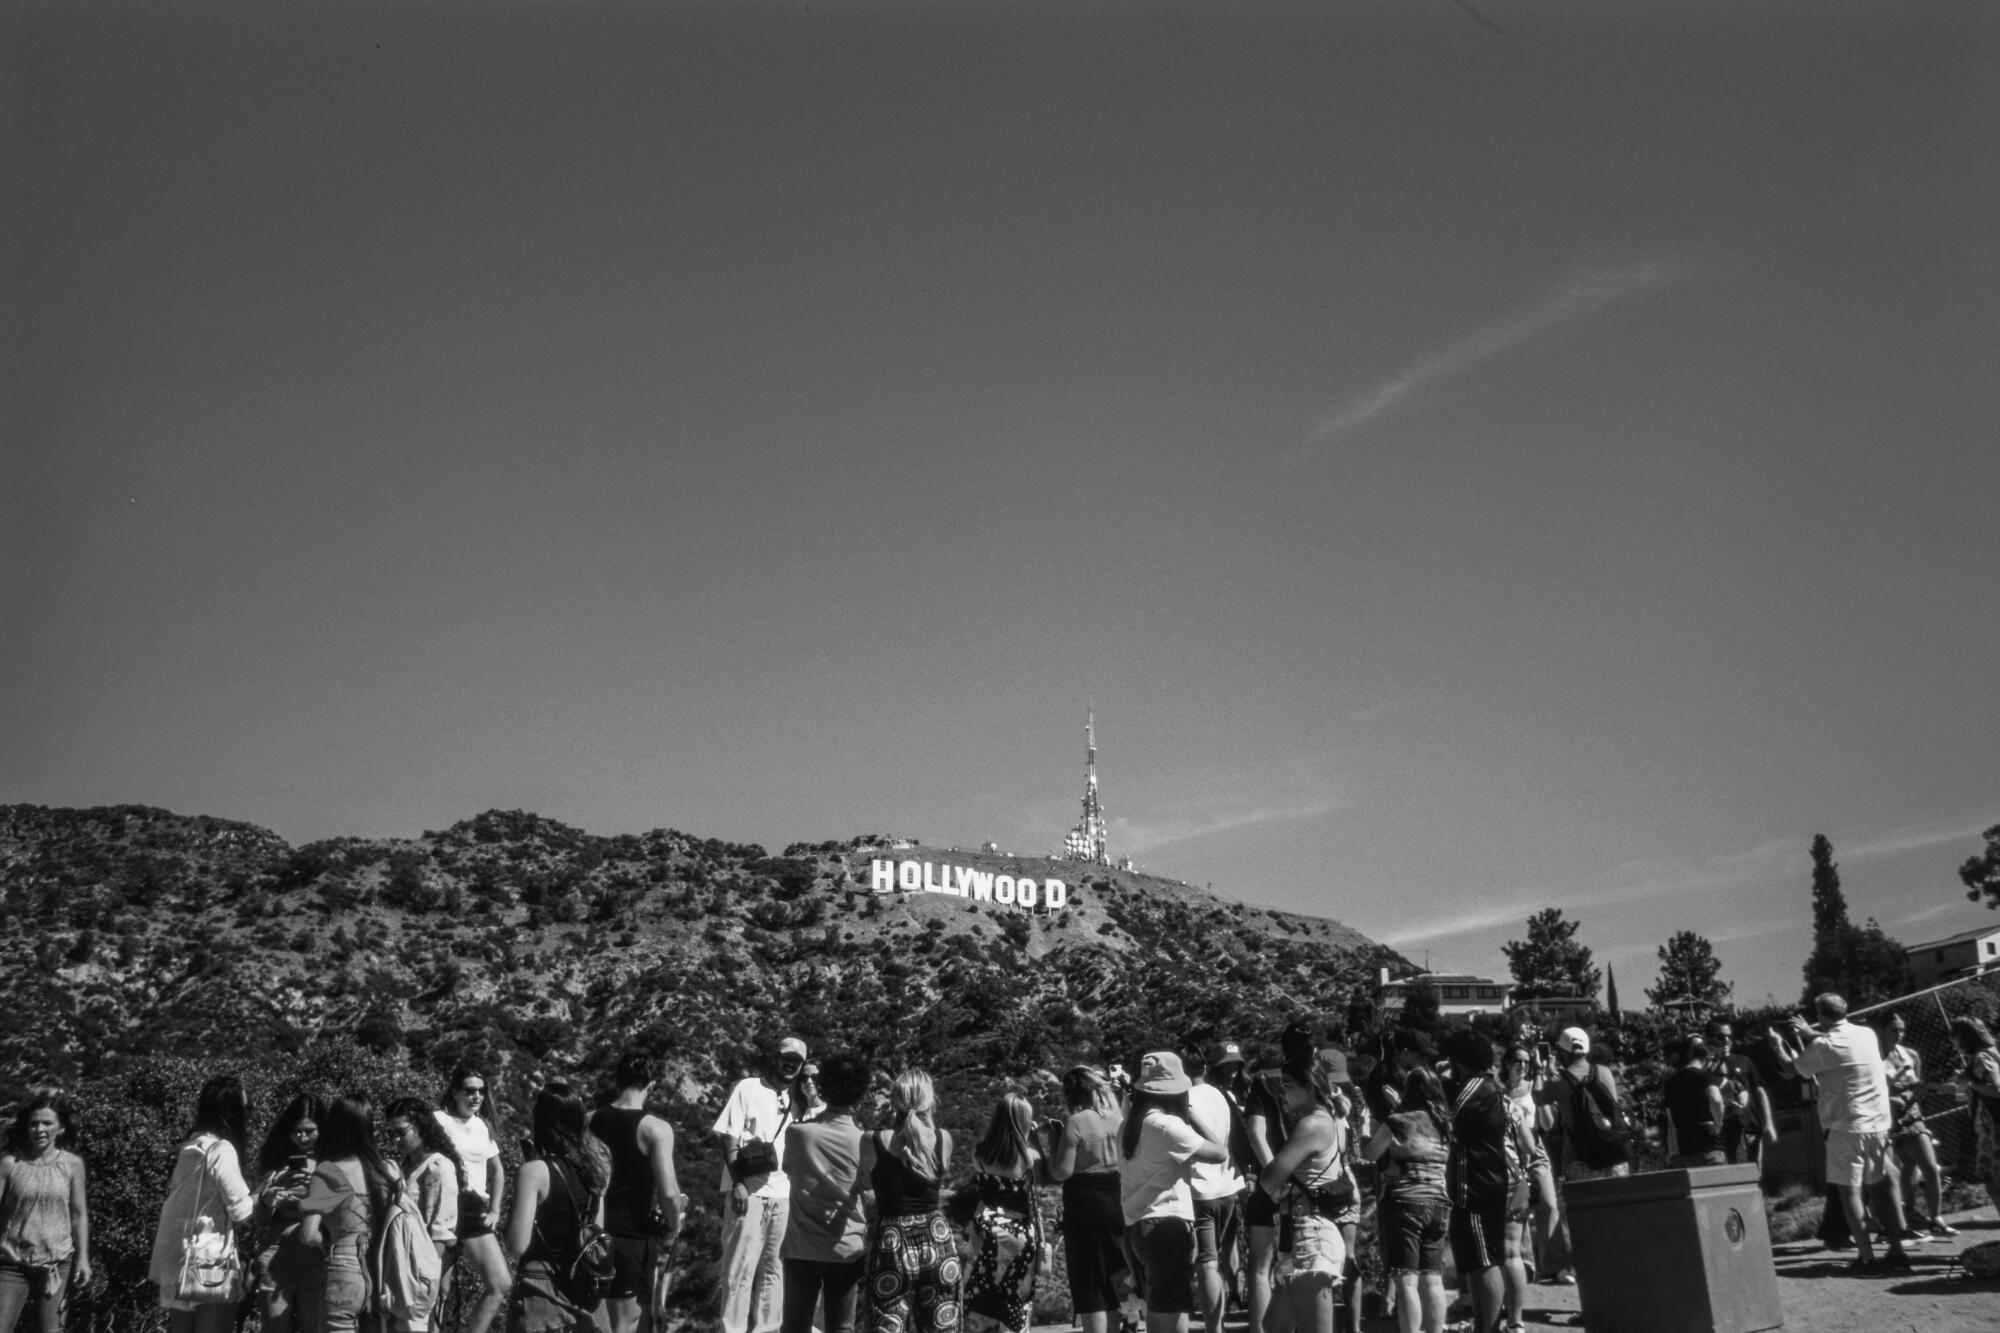 A crowd of tourists gathering to take photos of the Hollywood sign